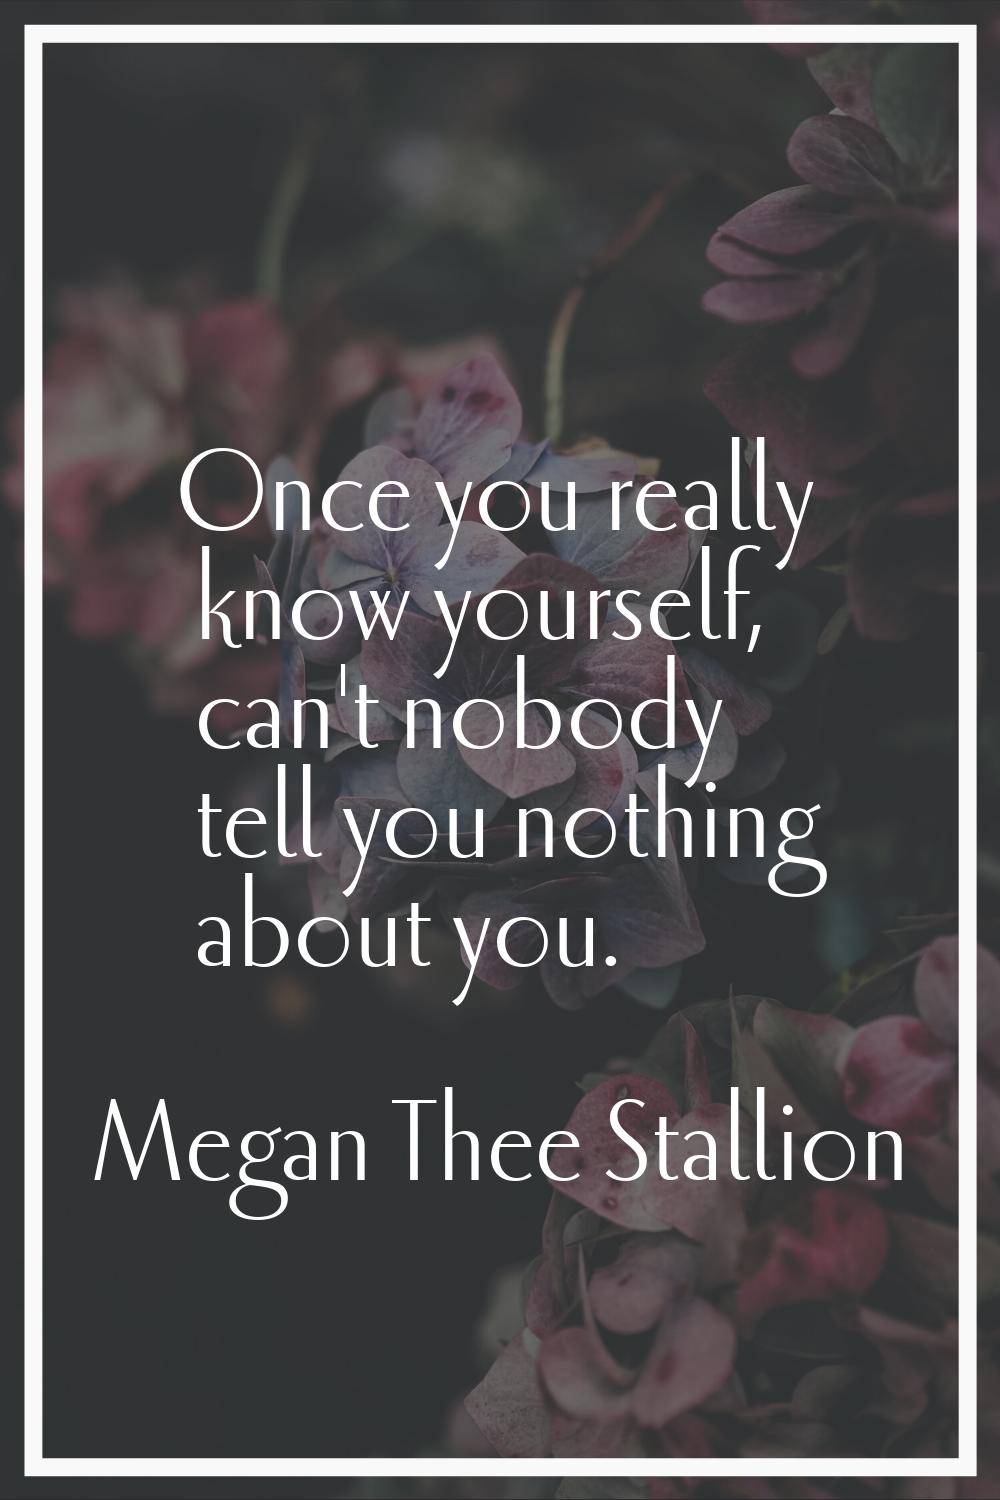 Once you really know yourself, can't nobody tell you nothing about you.